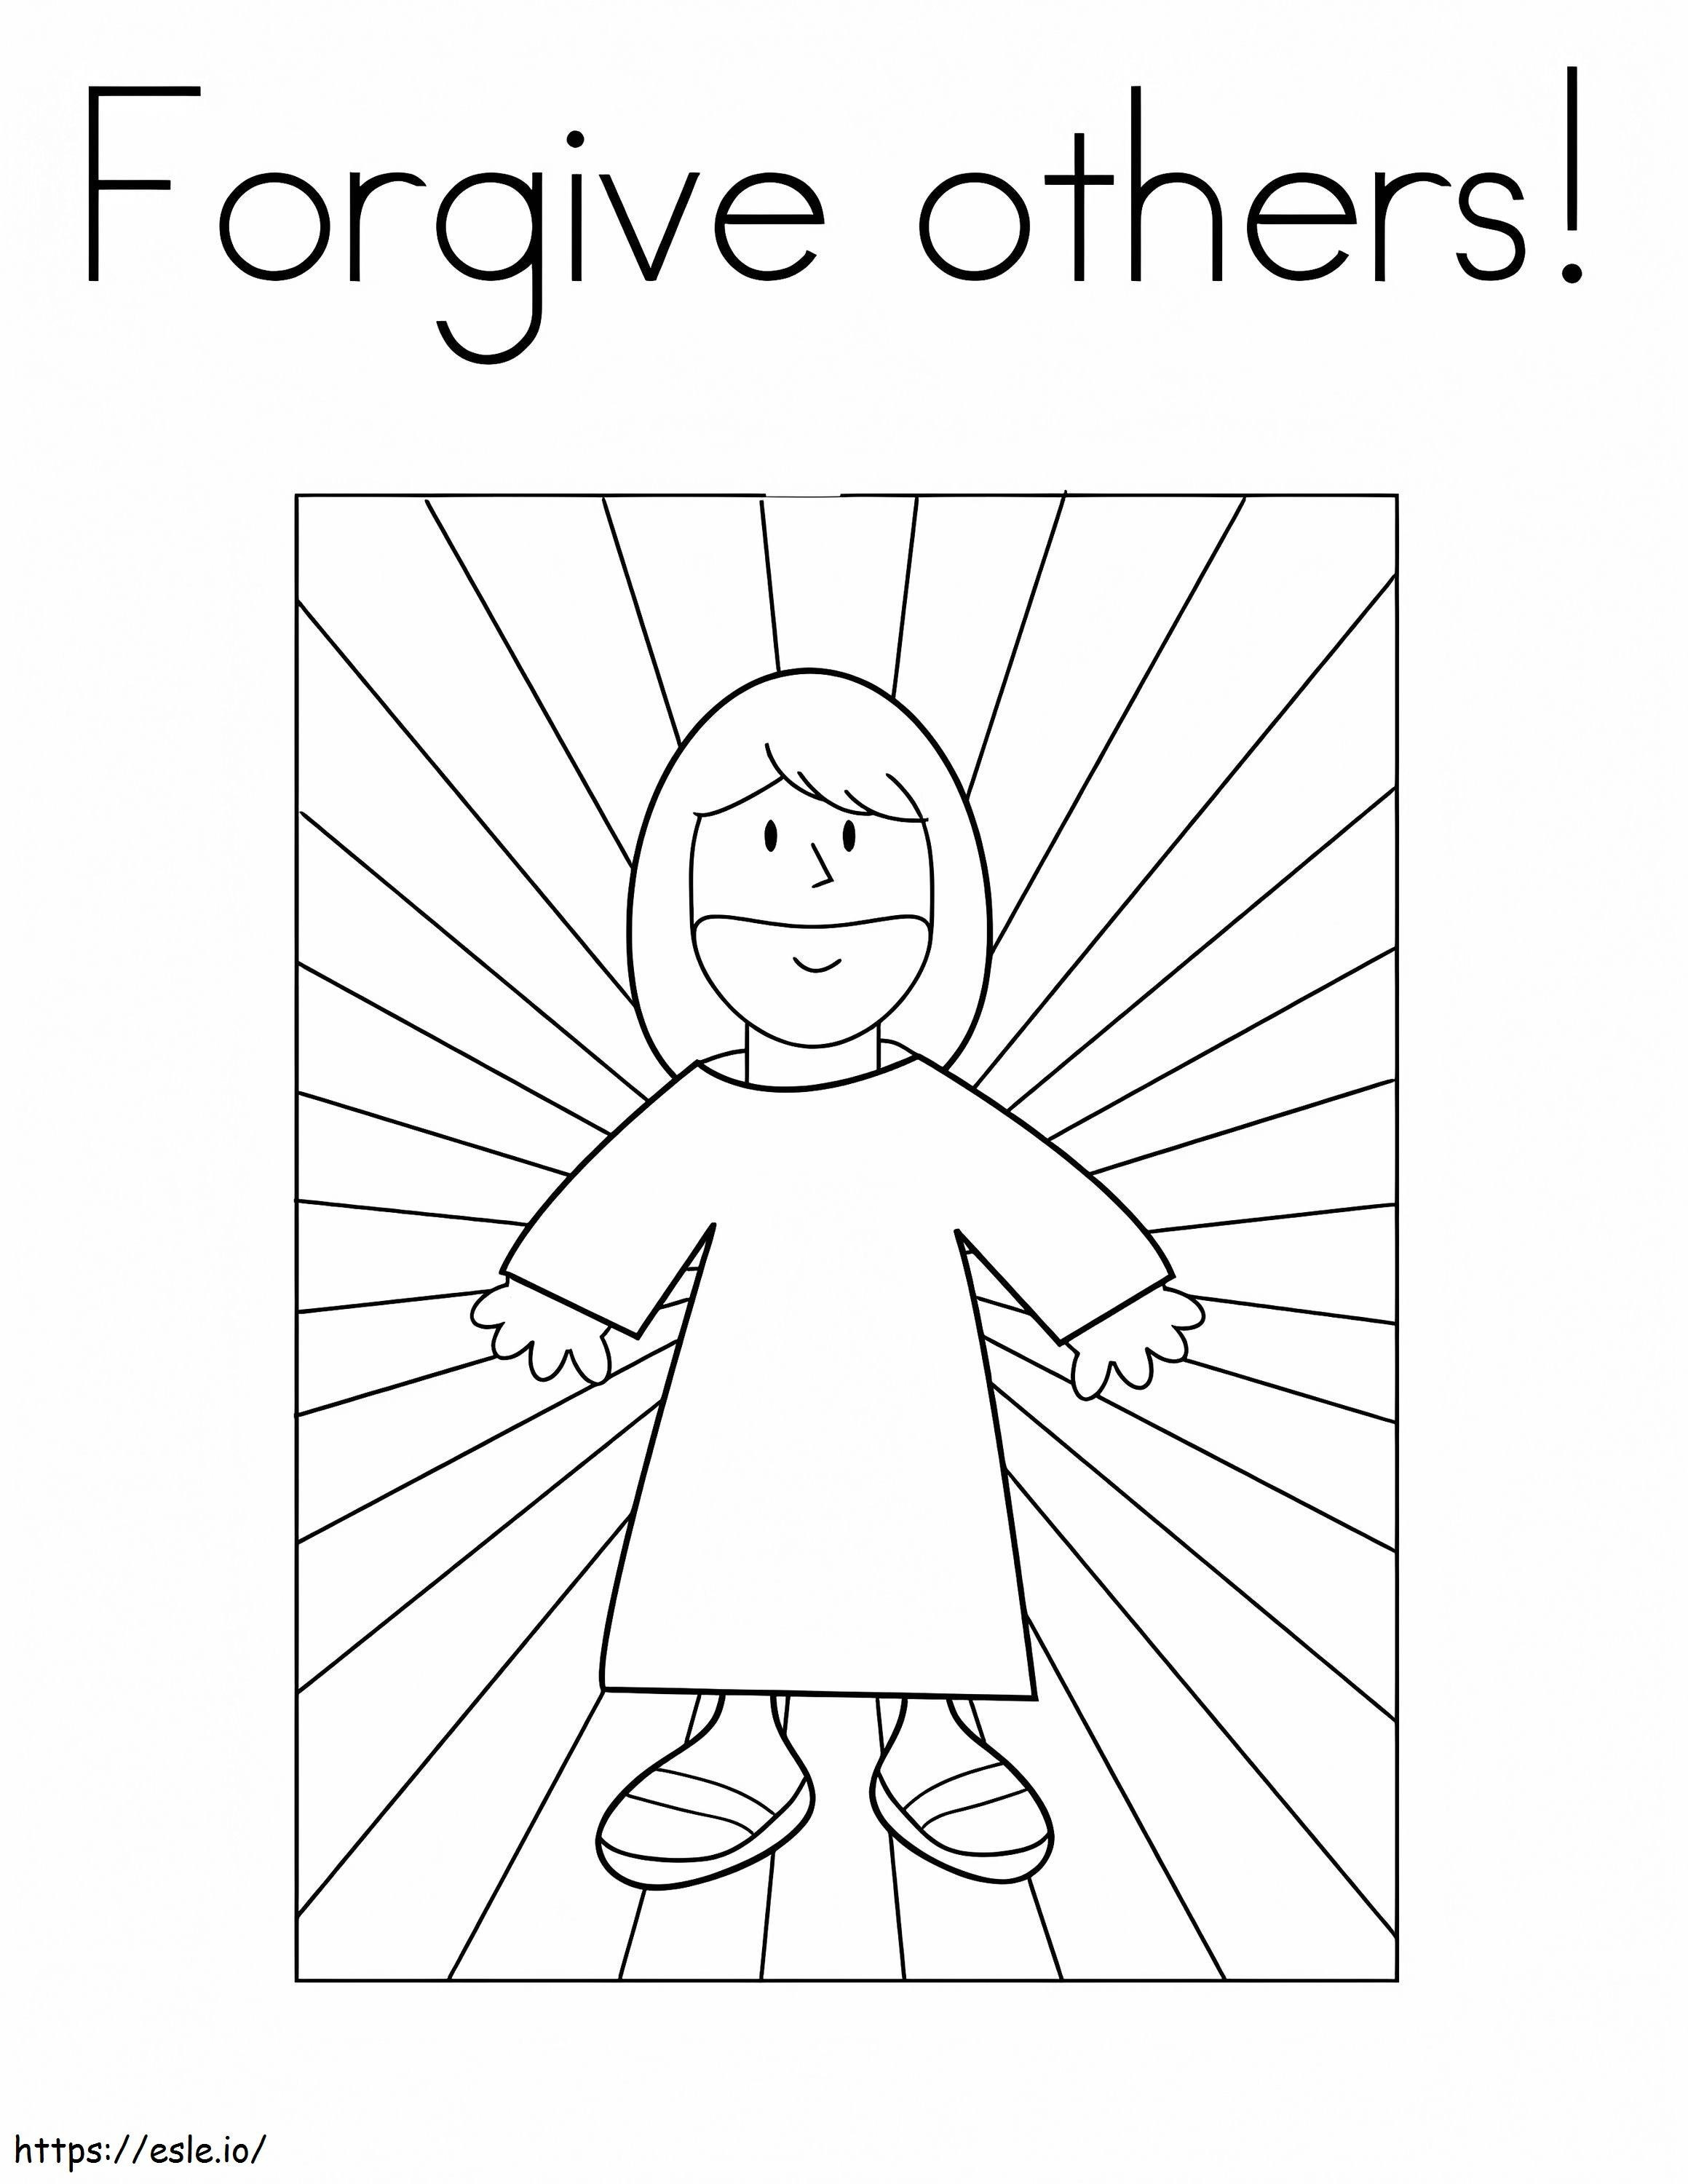 Bible Forgive Others coloring page